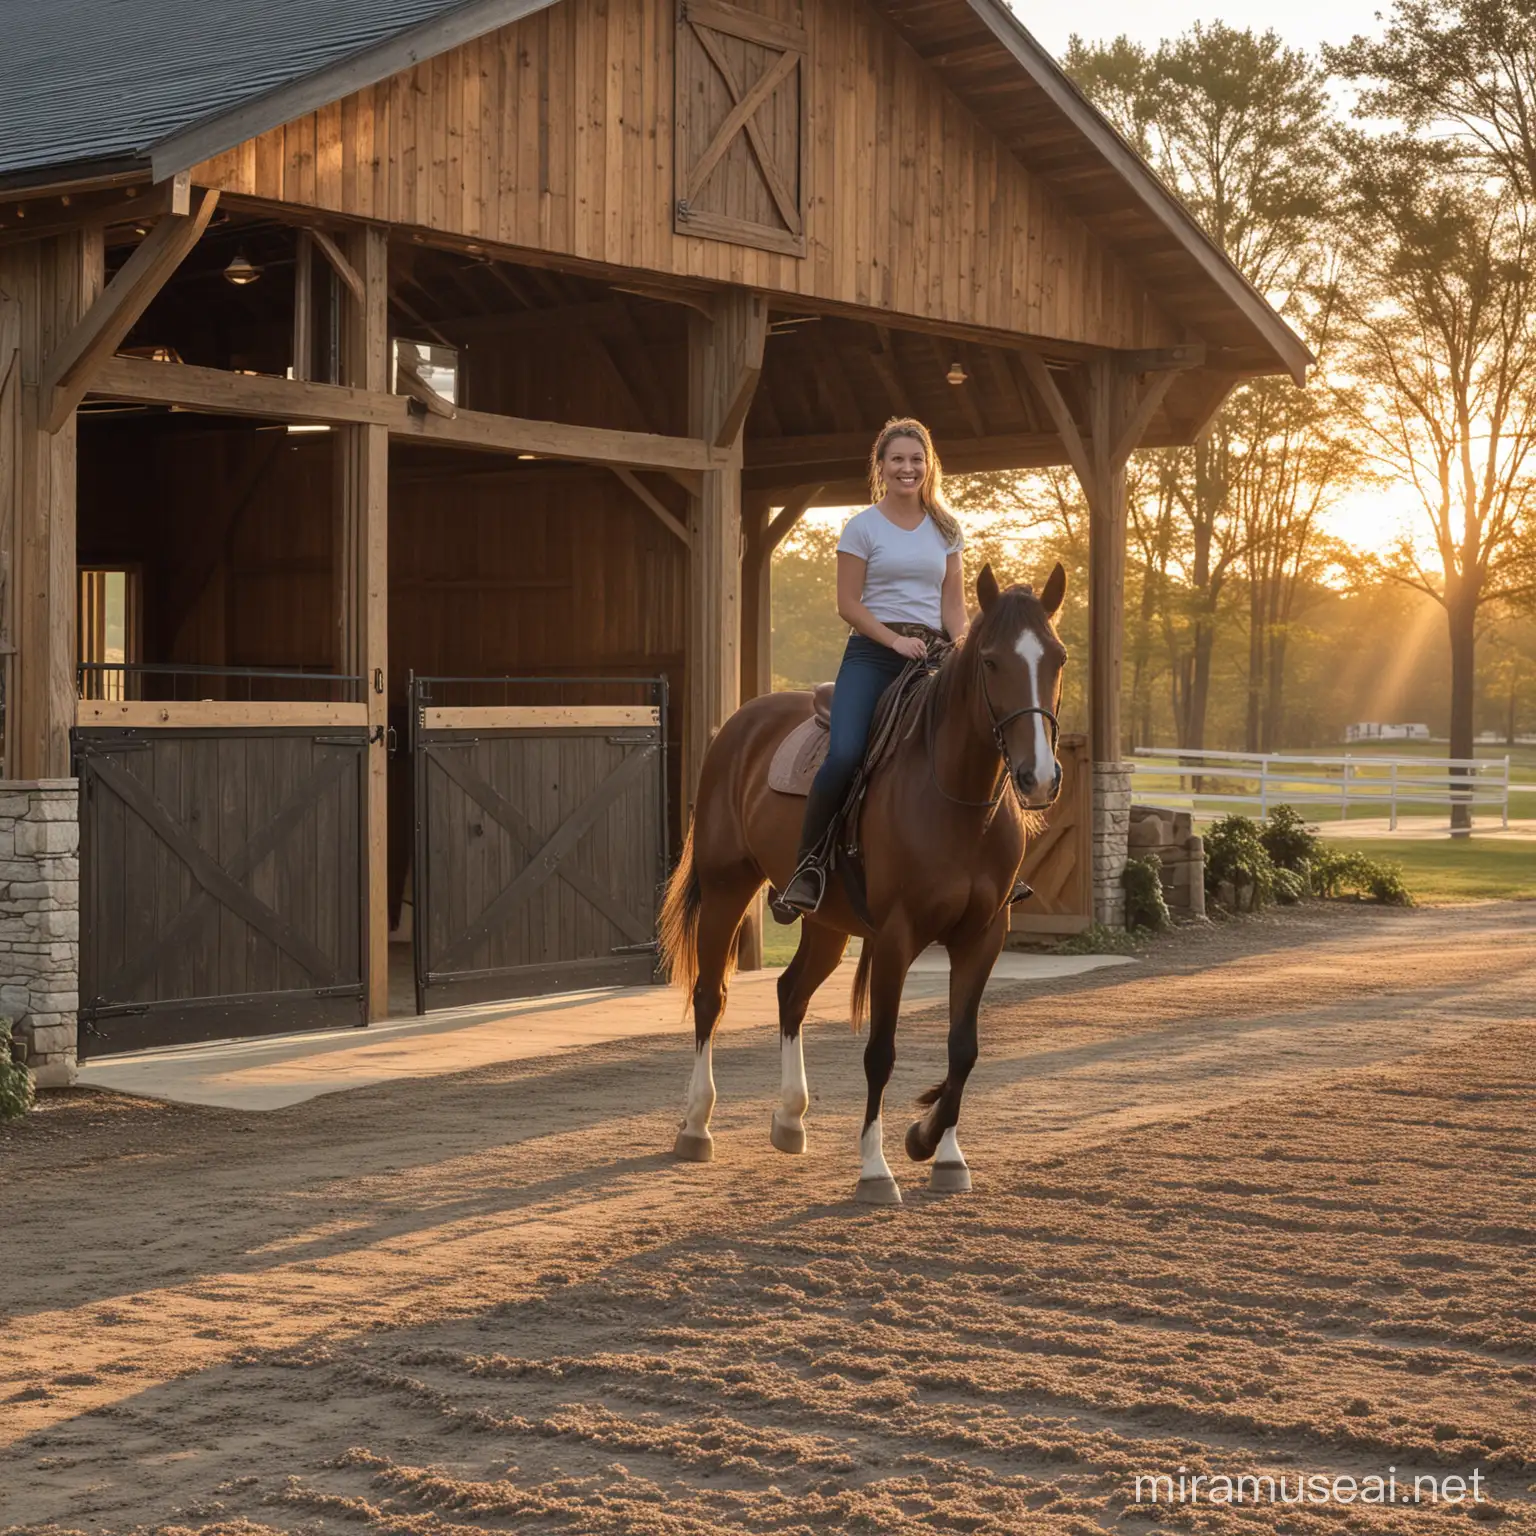 beautiful horses everywhere outside. horses. love. magic.  rectangular horse riding arena. sand on floor. Pennsylvania style.  timber frame. barn oak wood. black hardware. charcoal metal roof.  big barn doors. expensive. fancy. good quality. beautiful. architectonic correct. equilibrium. detailed. very real. sunset.  some people riding horses. beautiful rich woman. smiling.